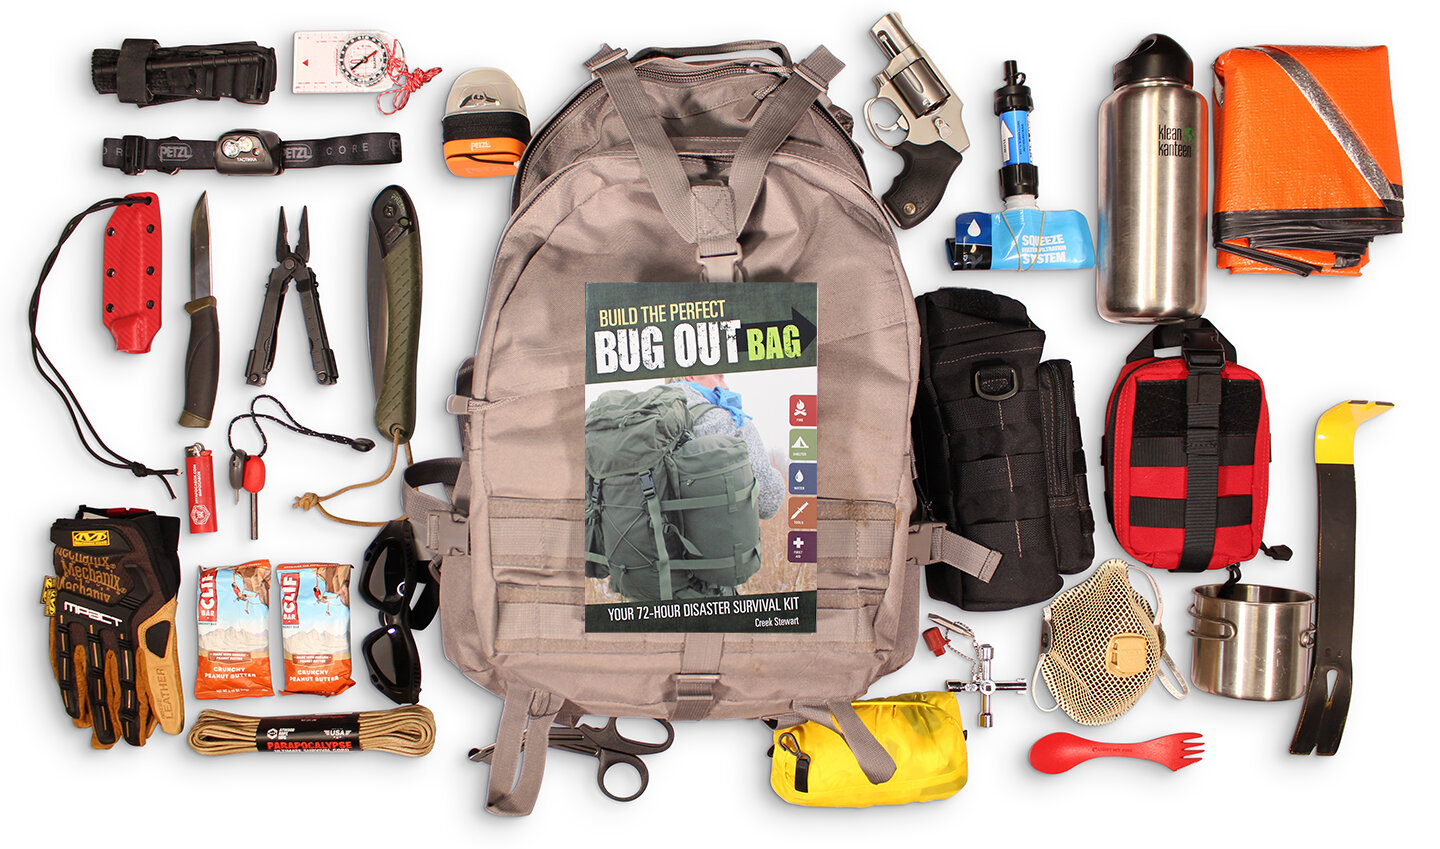 Prepare for Emergency Disaster Guide Bug Out Bag Kit Book Hurricane Survival 